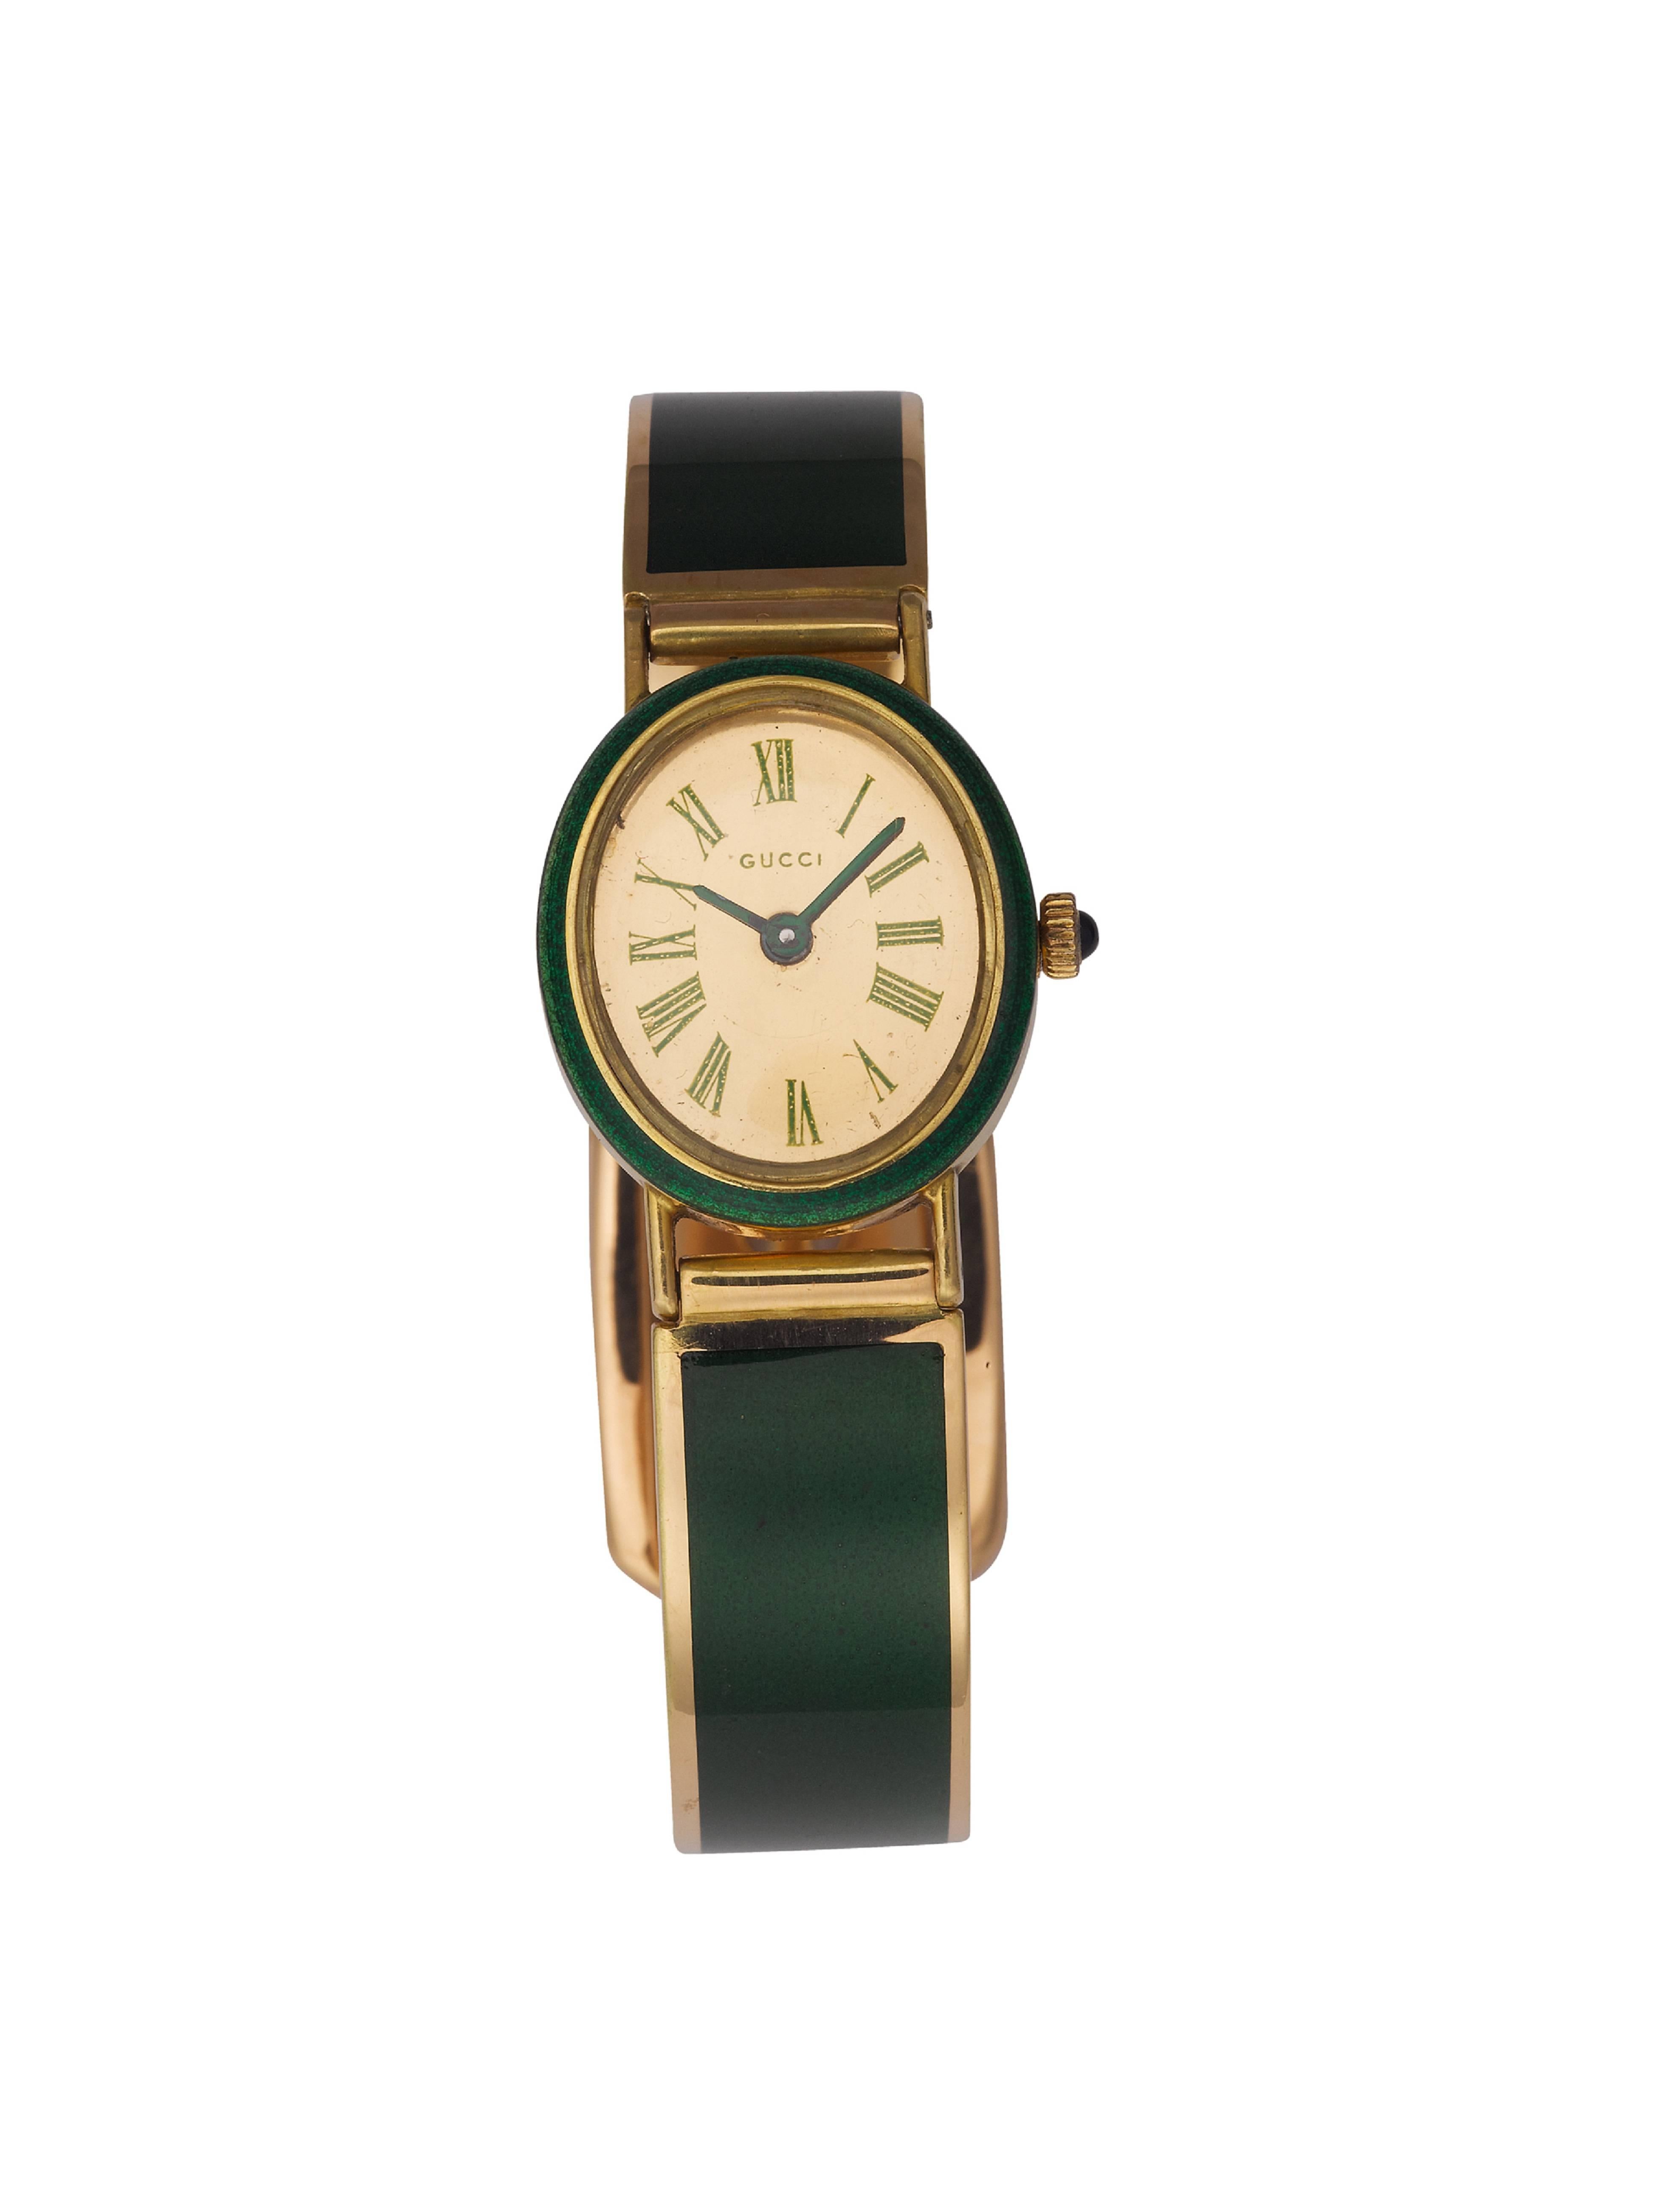 18K Gold, Green Enamel and Cabochon Sapphire Bangle Watch. **Hallmarks: No. 33708 18K 750 Gucci Italy **Face: Gucci